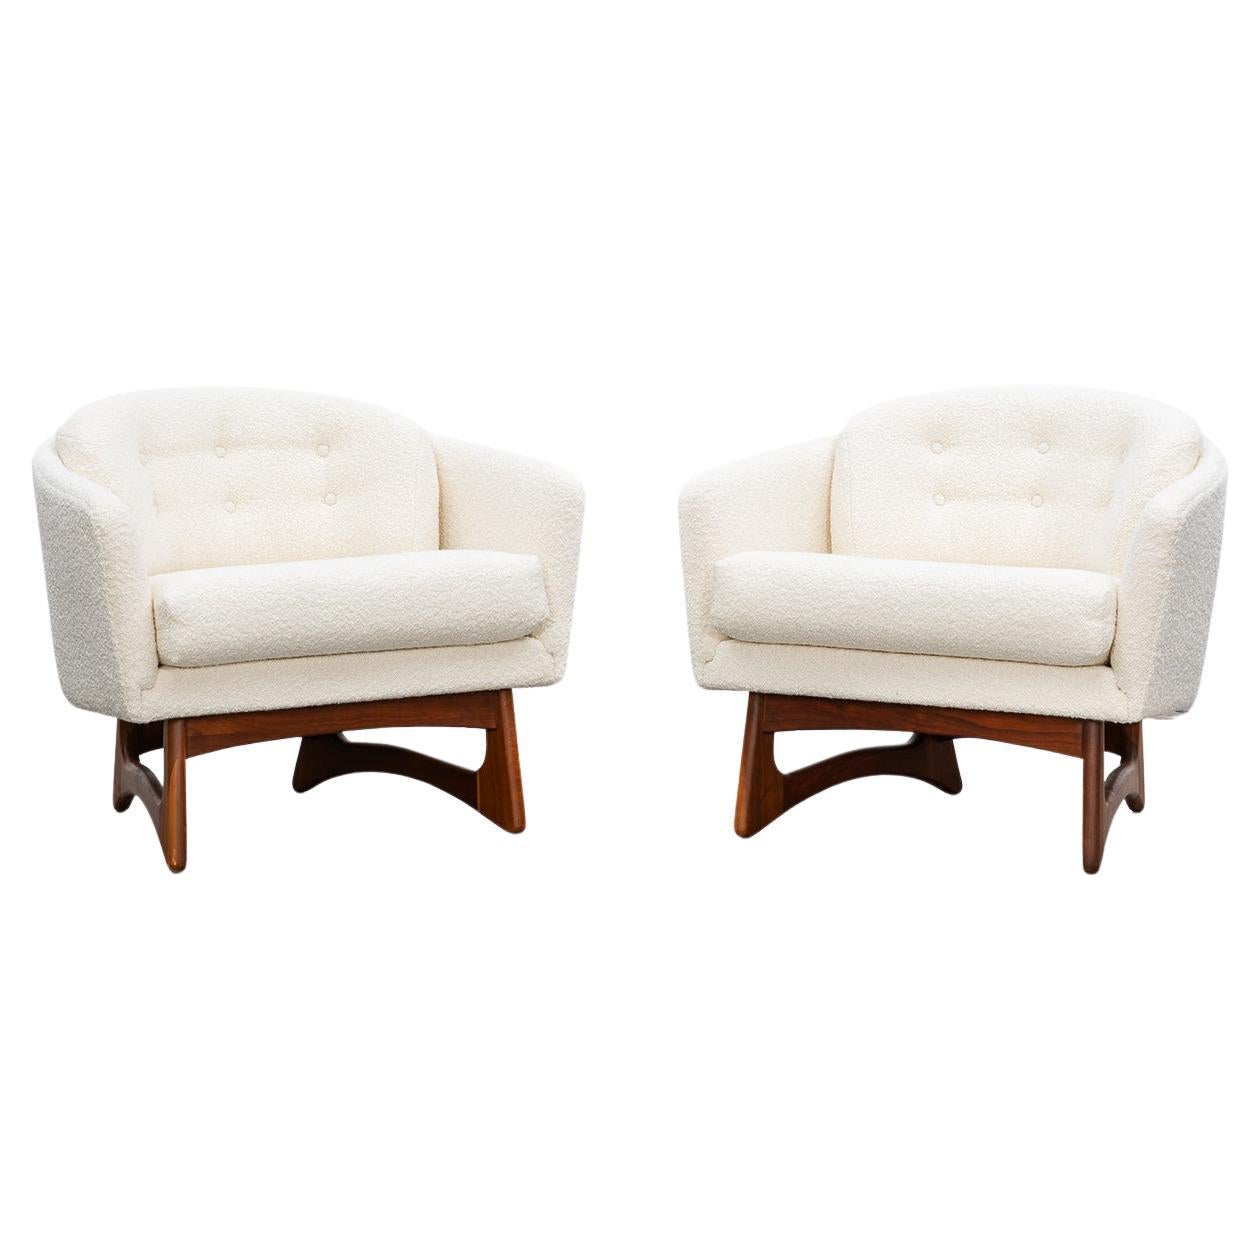 1960s Walnut Base, White Upholstery Pair of Lounge Chairs by Adrian Pearsall For Sale